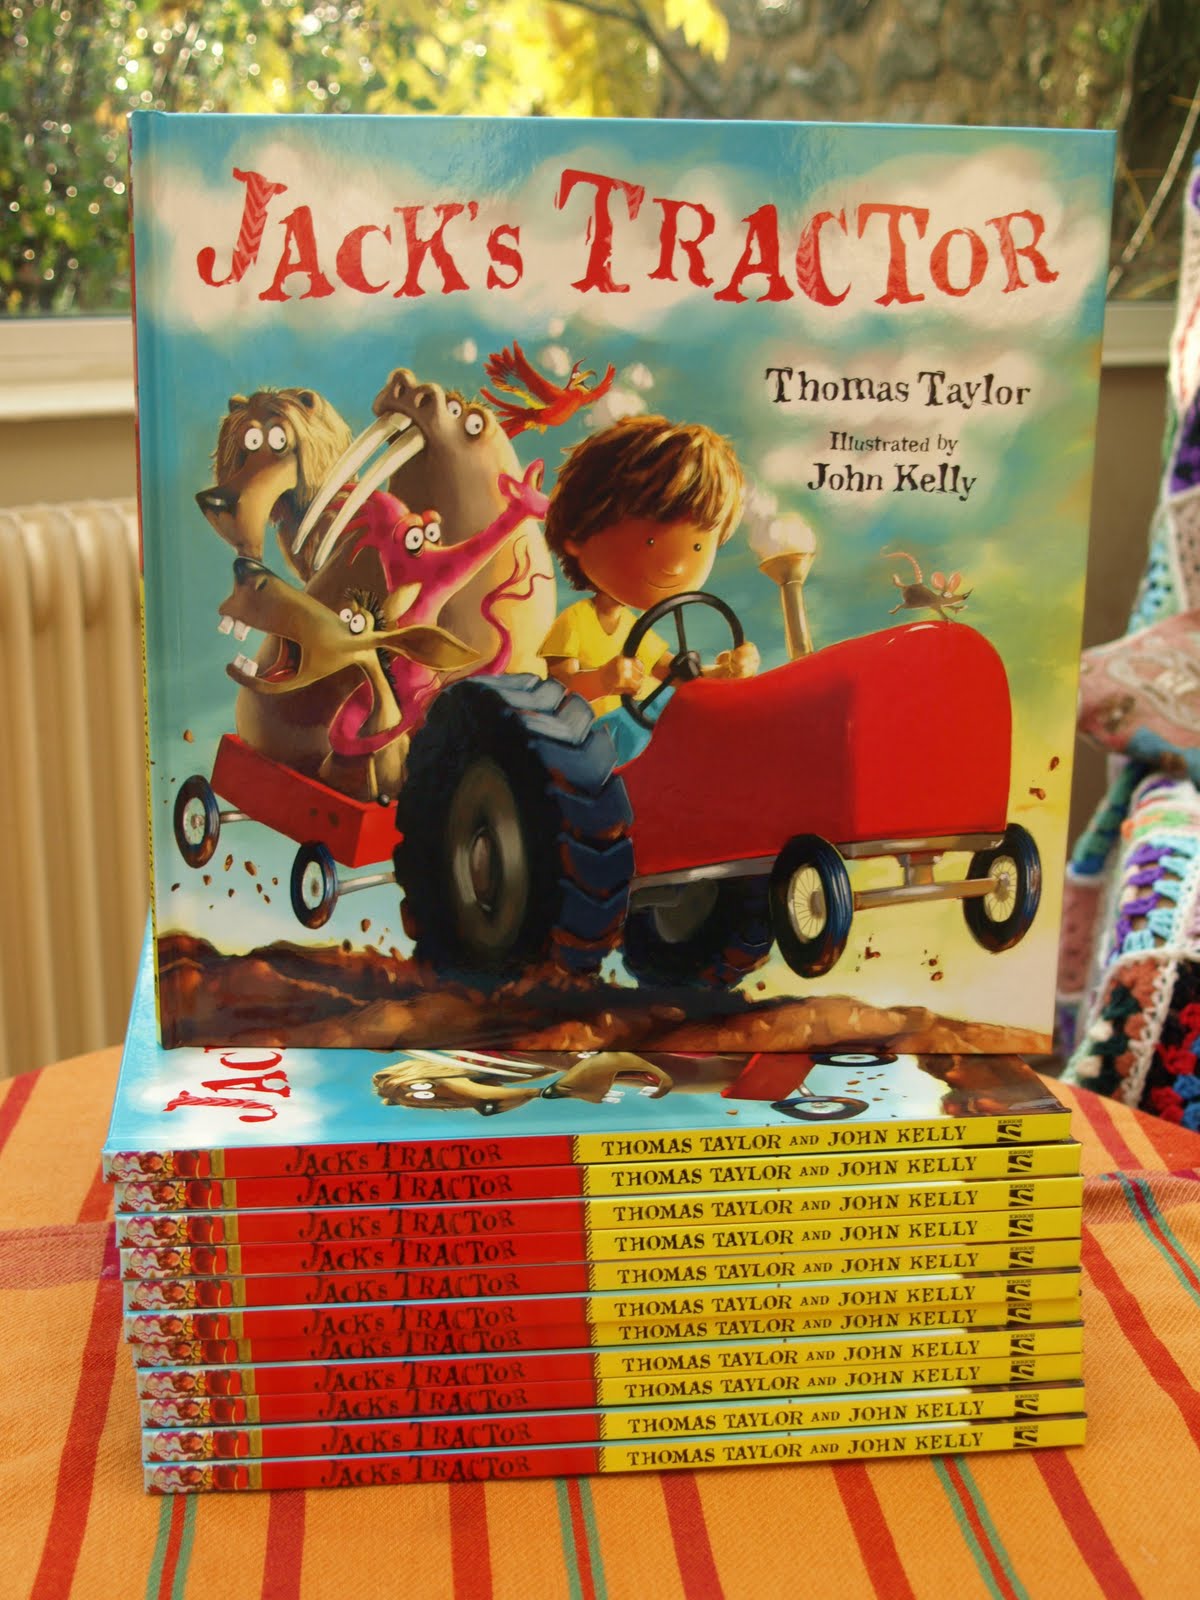 Unbridled Self-promotion — Jack’s Tractor